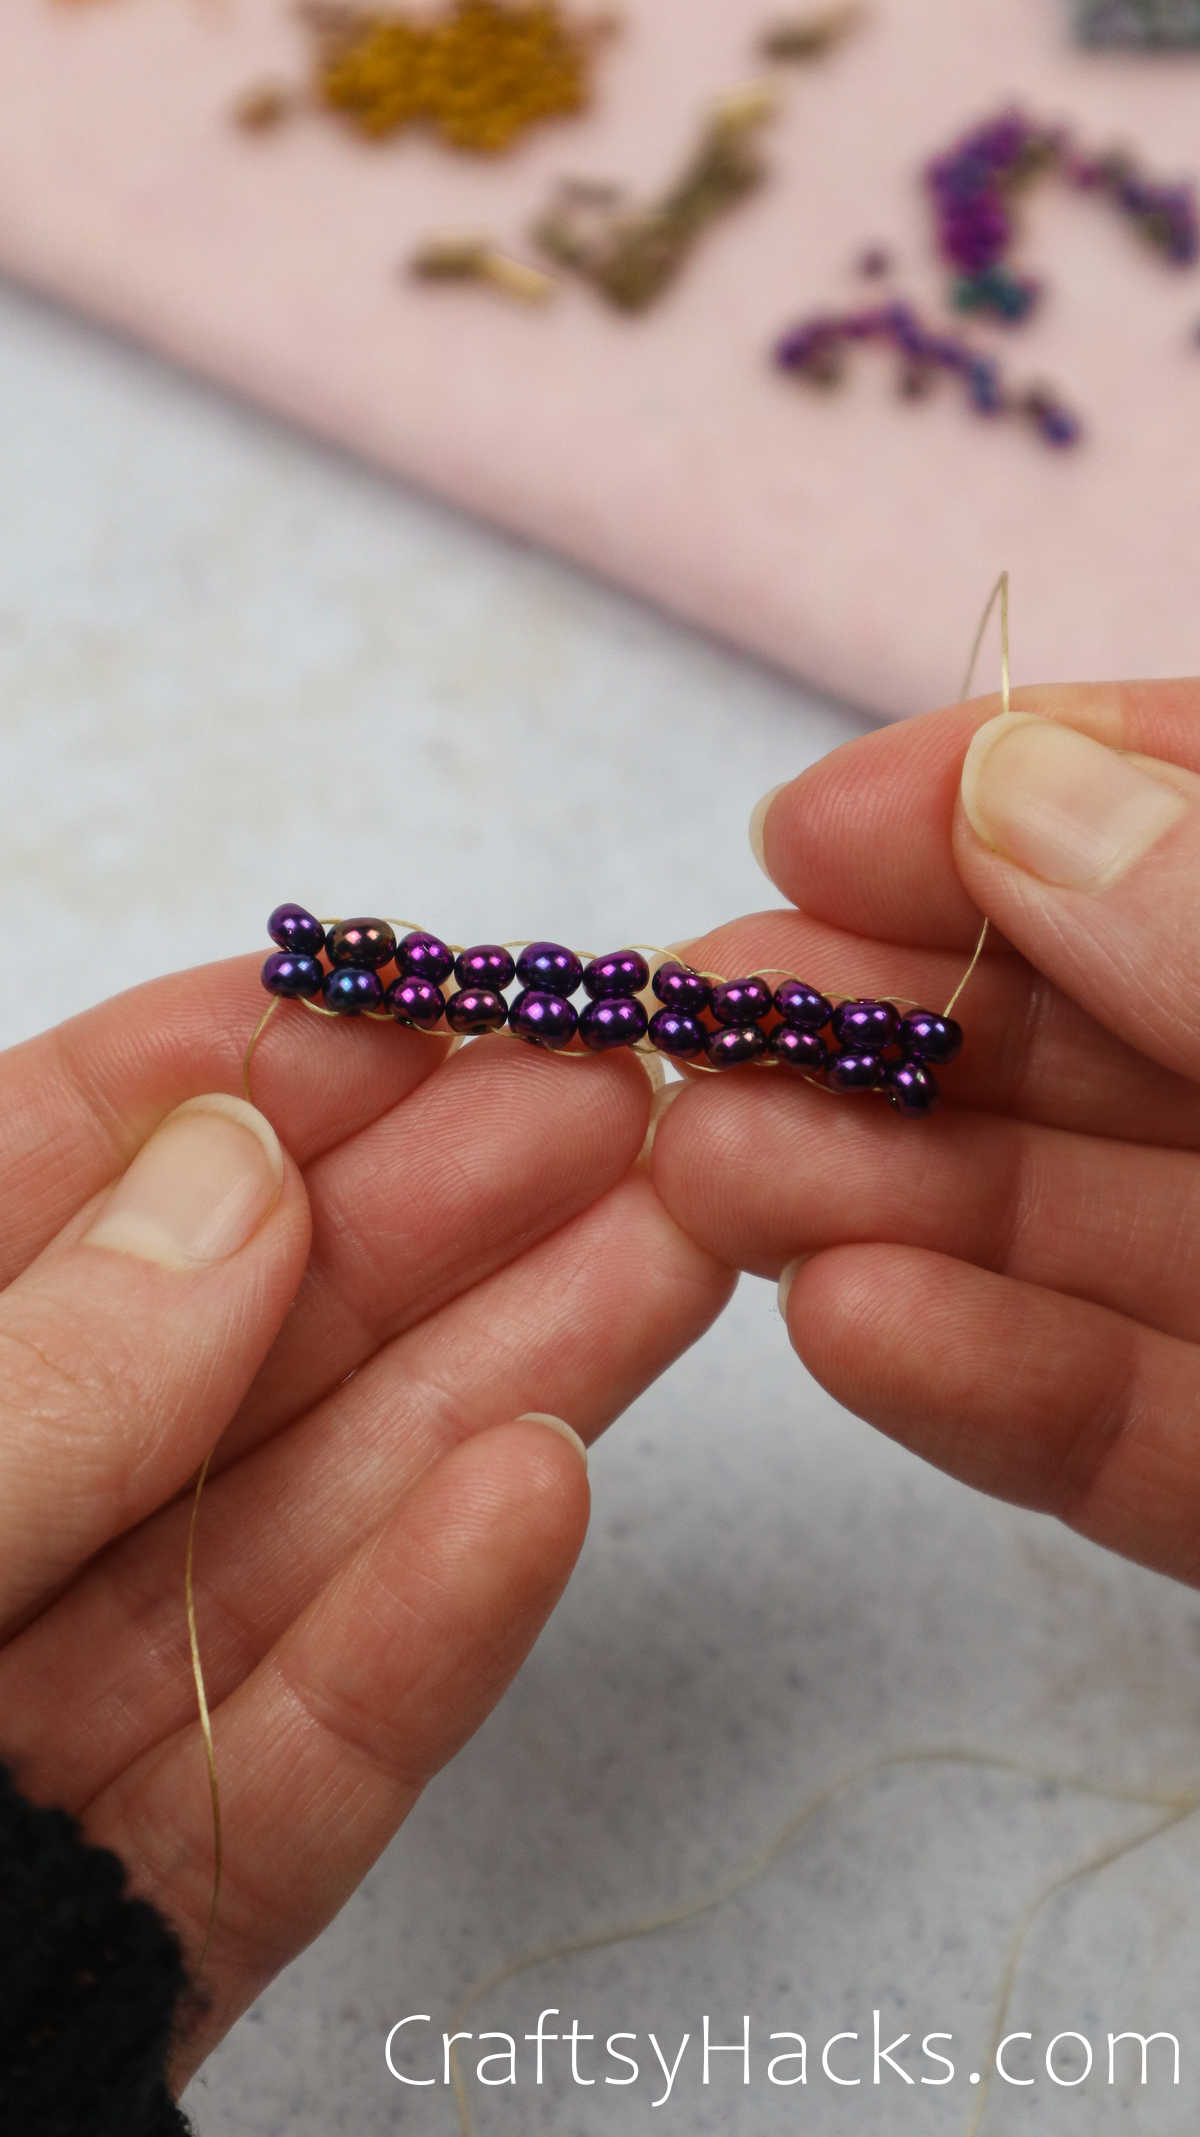 a full complete ladder of beads